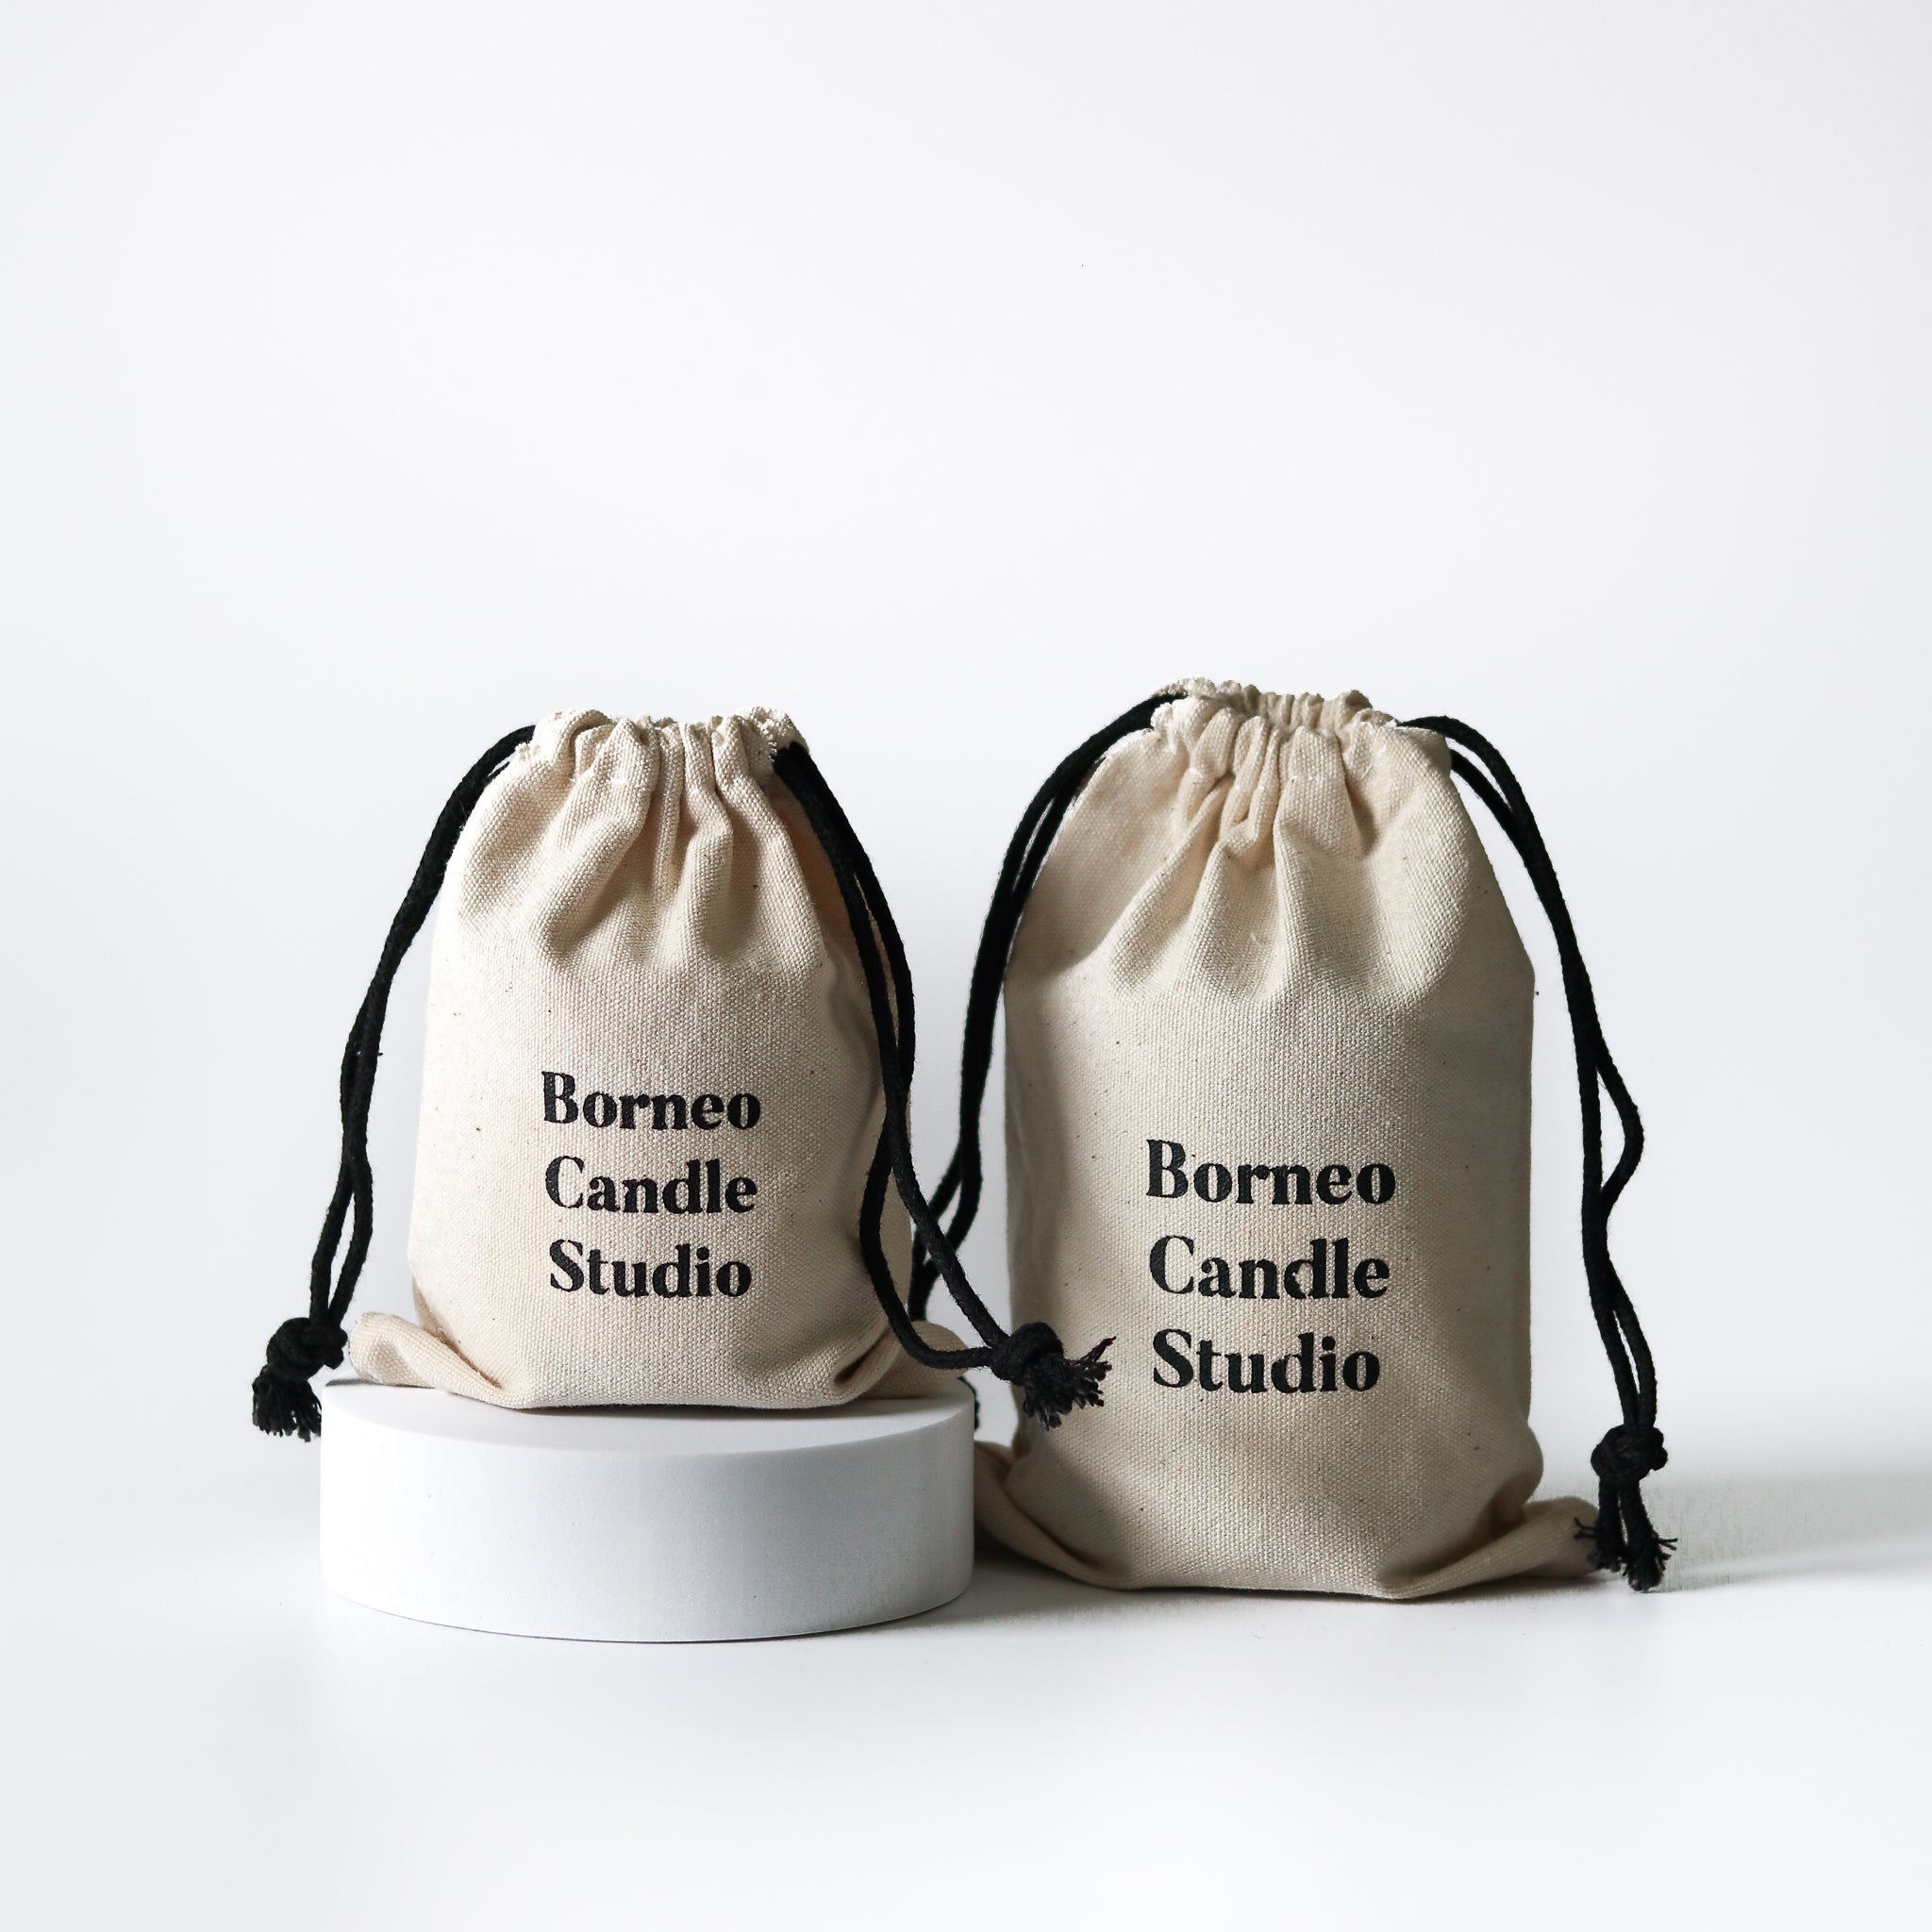 Borneo Candle Studio Product Candle Packaging Reusable Cotton Pouch